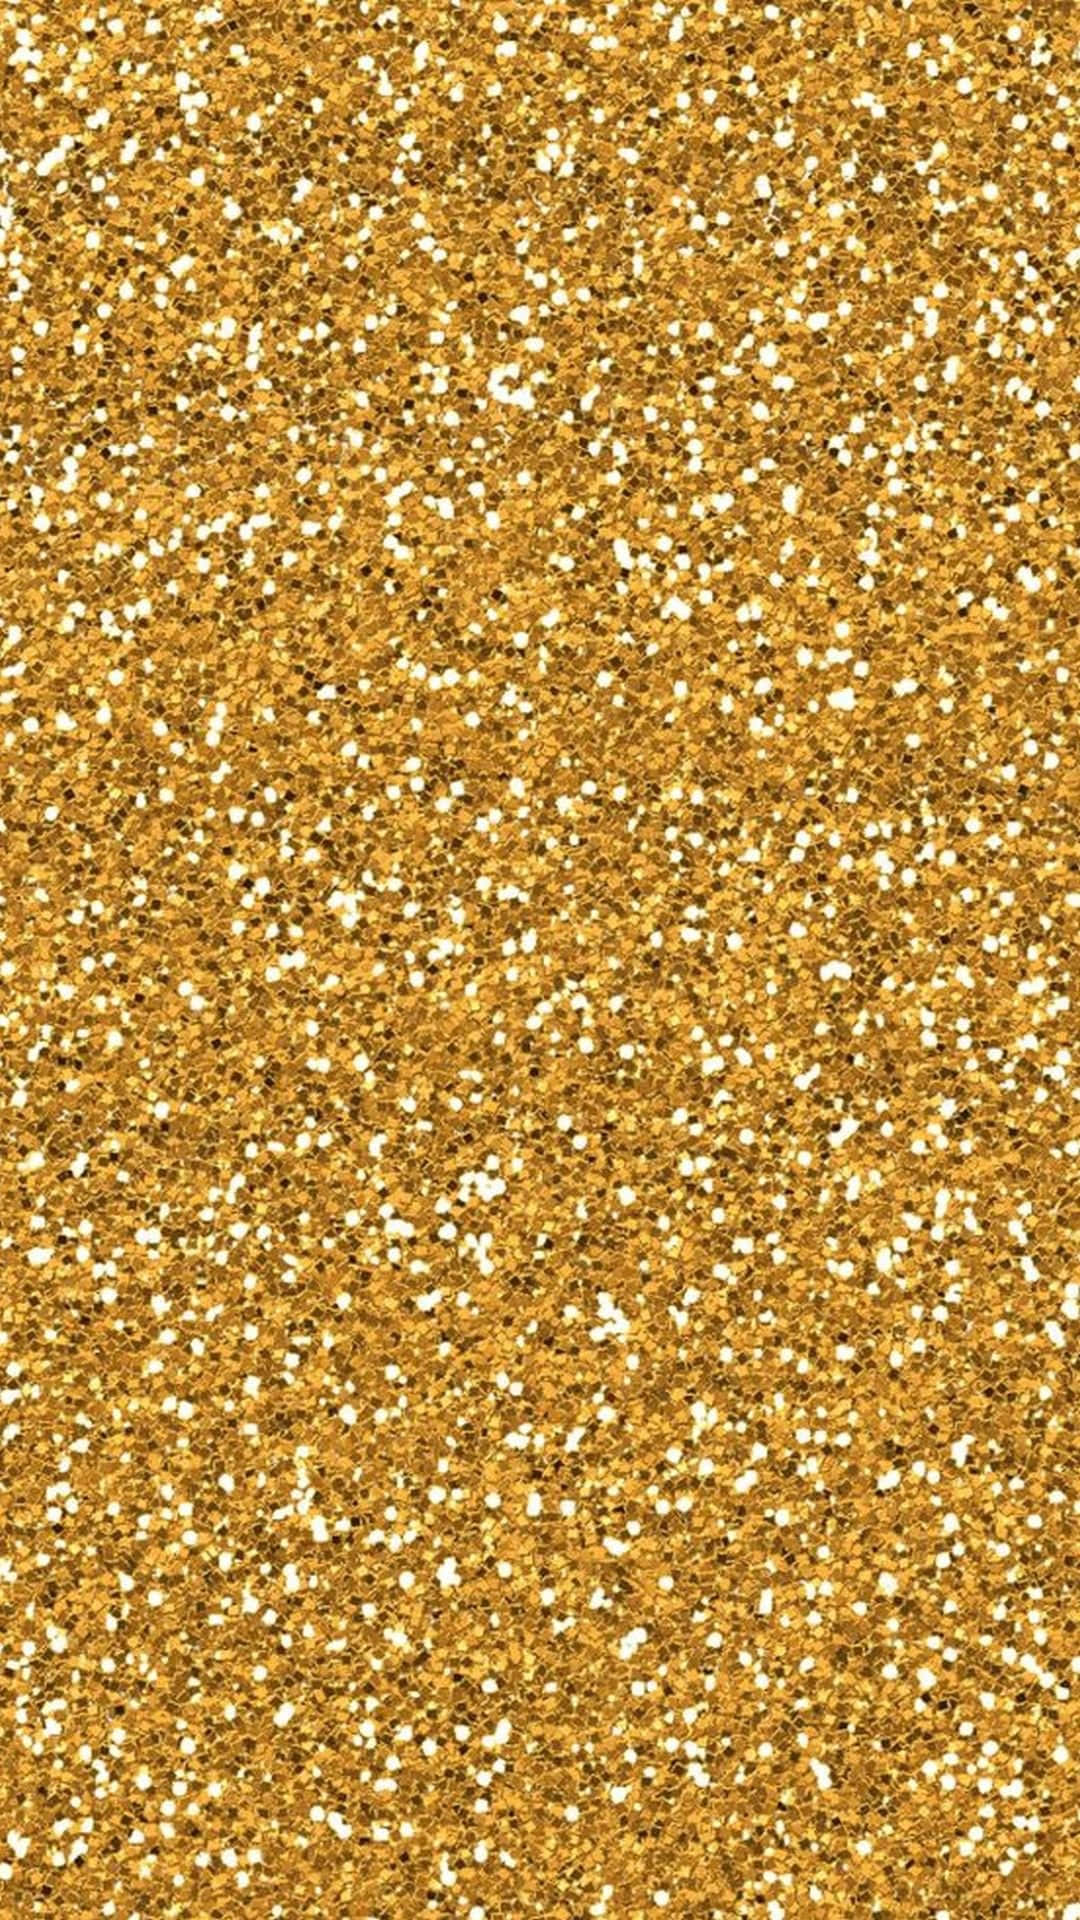 Enthralling Radiance of Glittering Gold